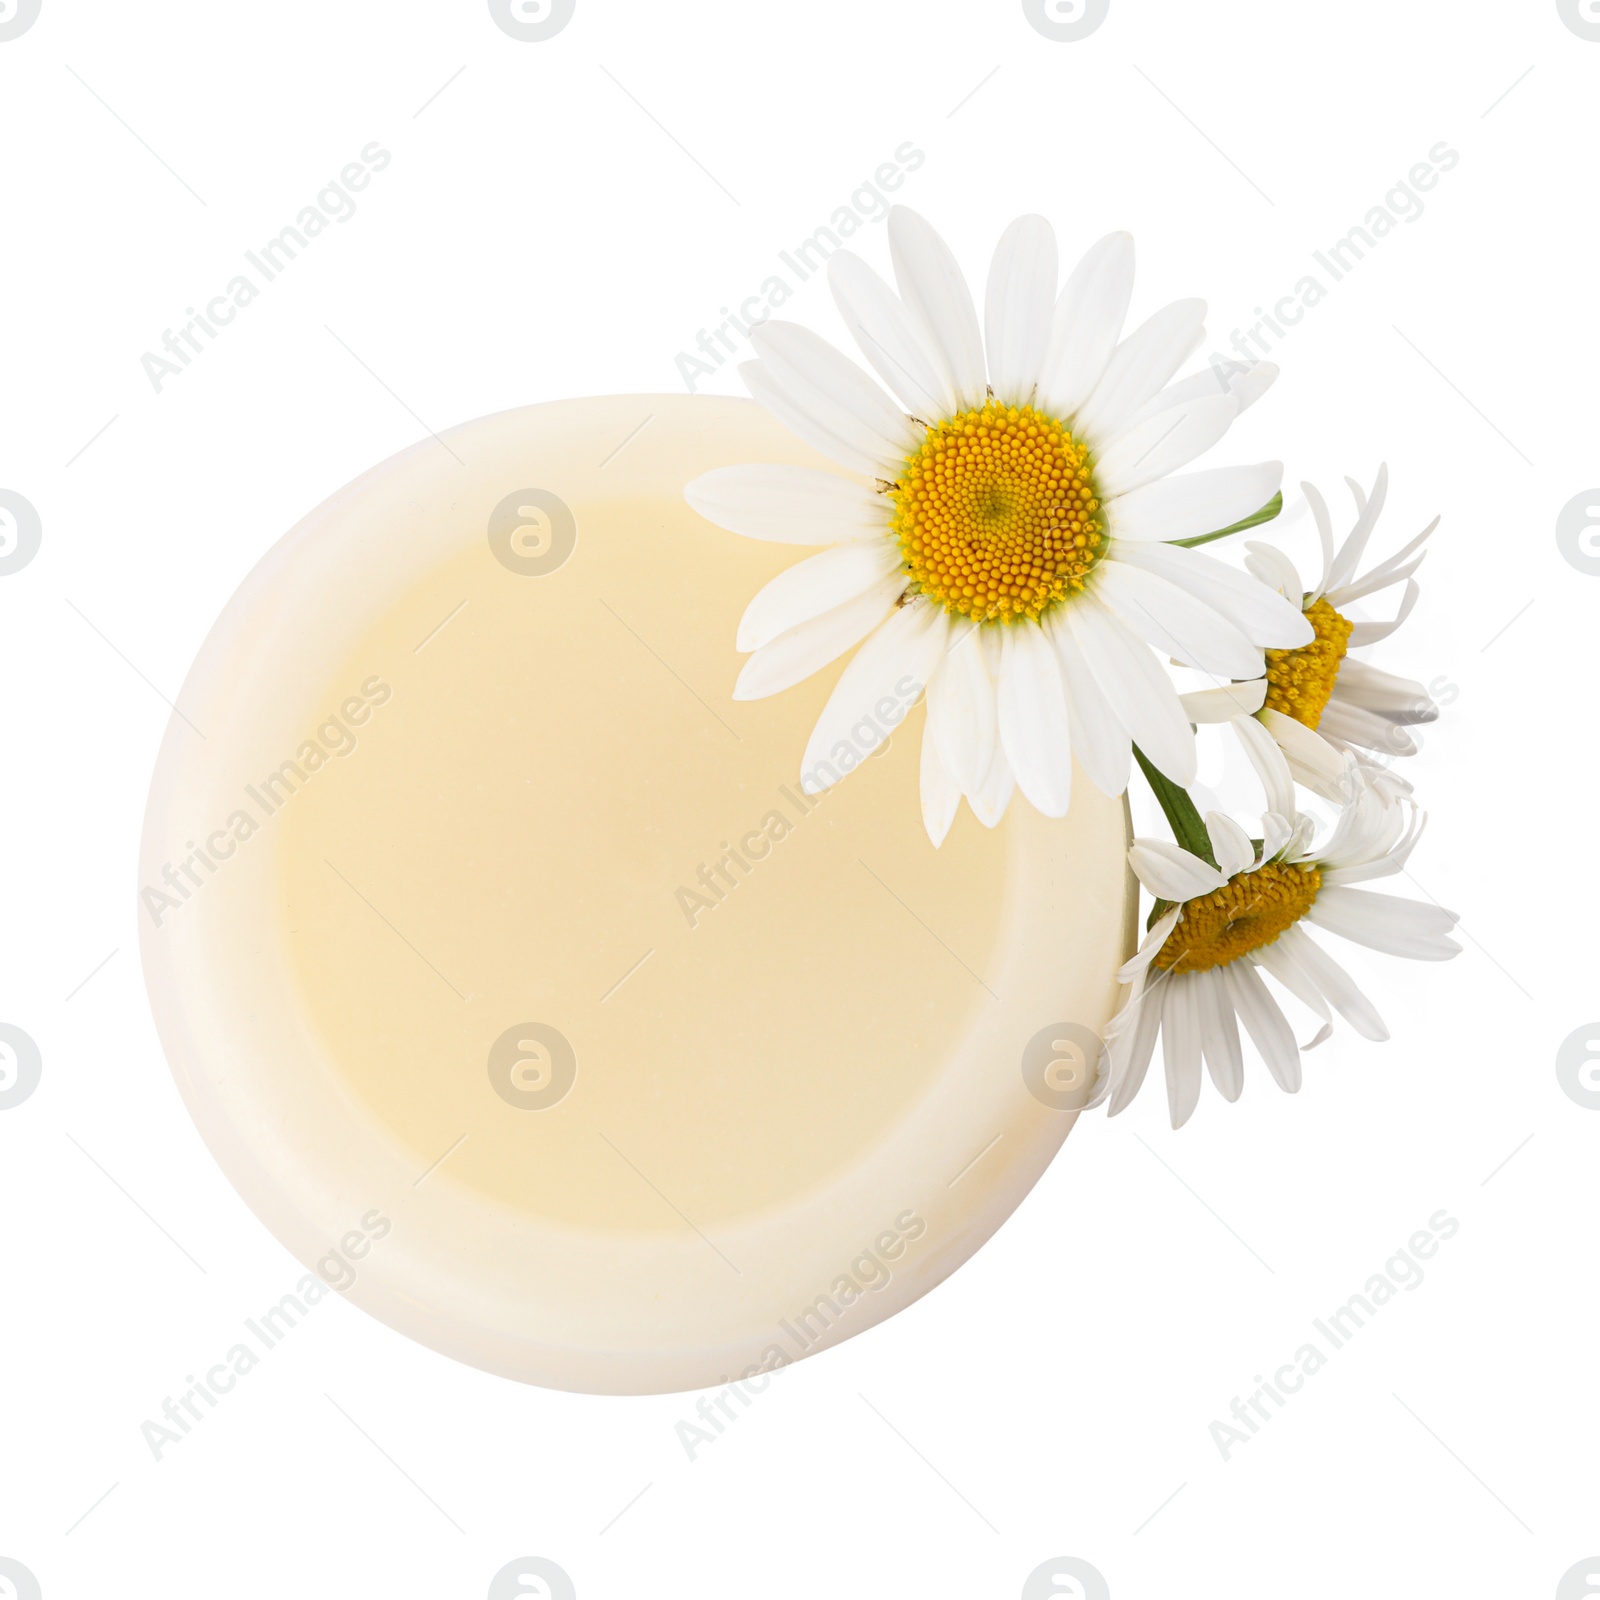 Photo of Solid shampoo bar and chamomiles on white background, top view. Hair care